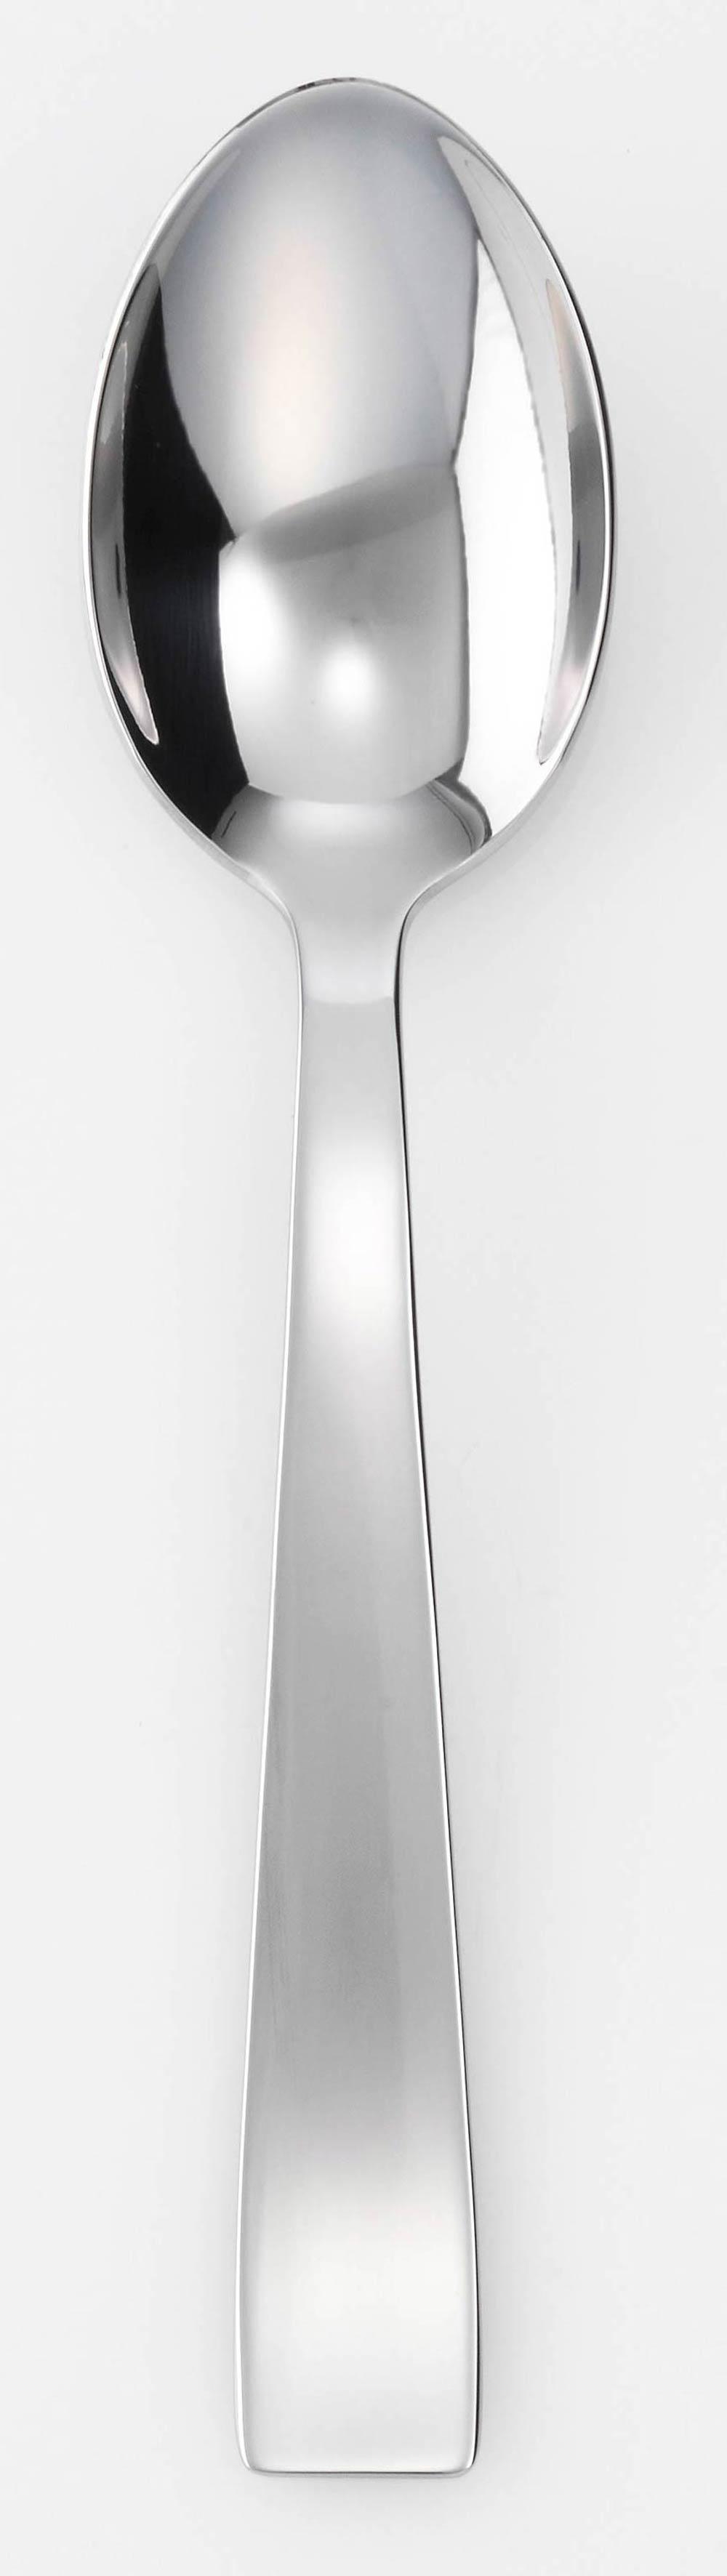 Gio Ponti Serving Spoon Stainless Steel